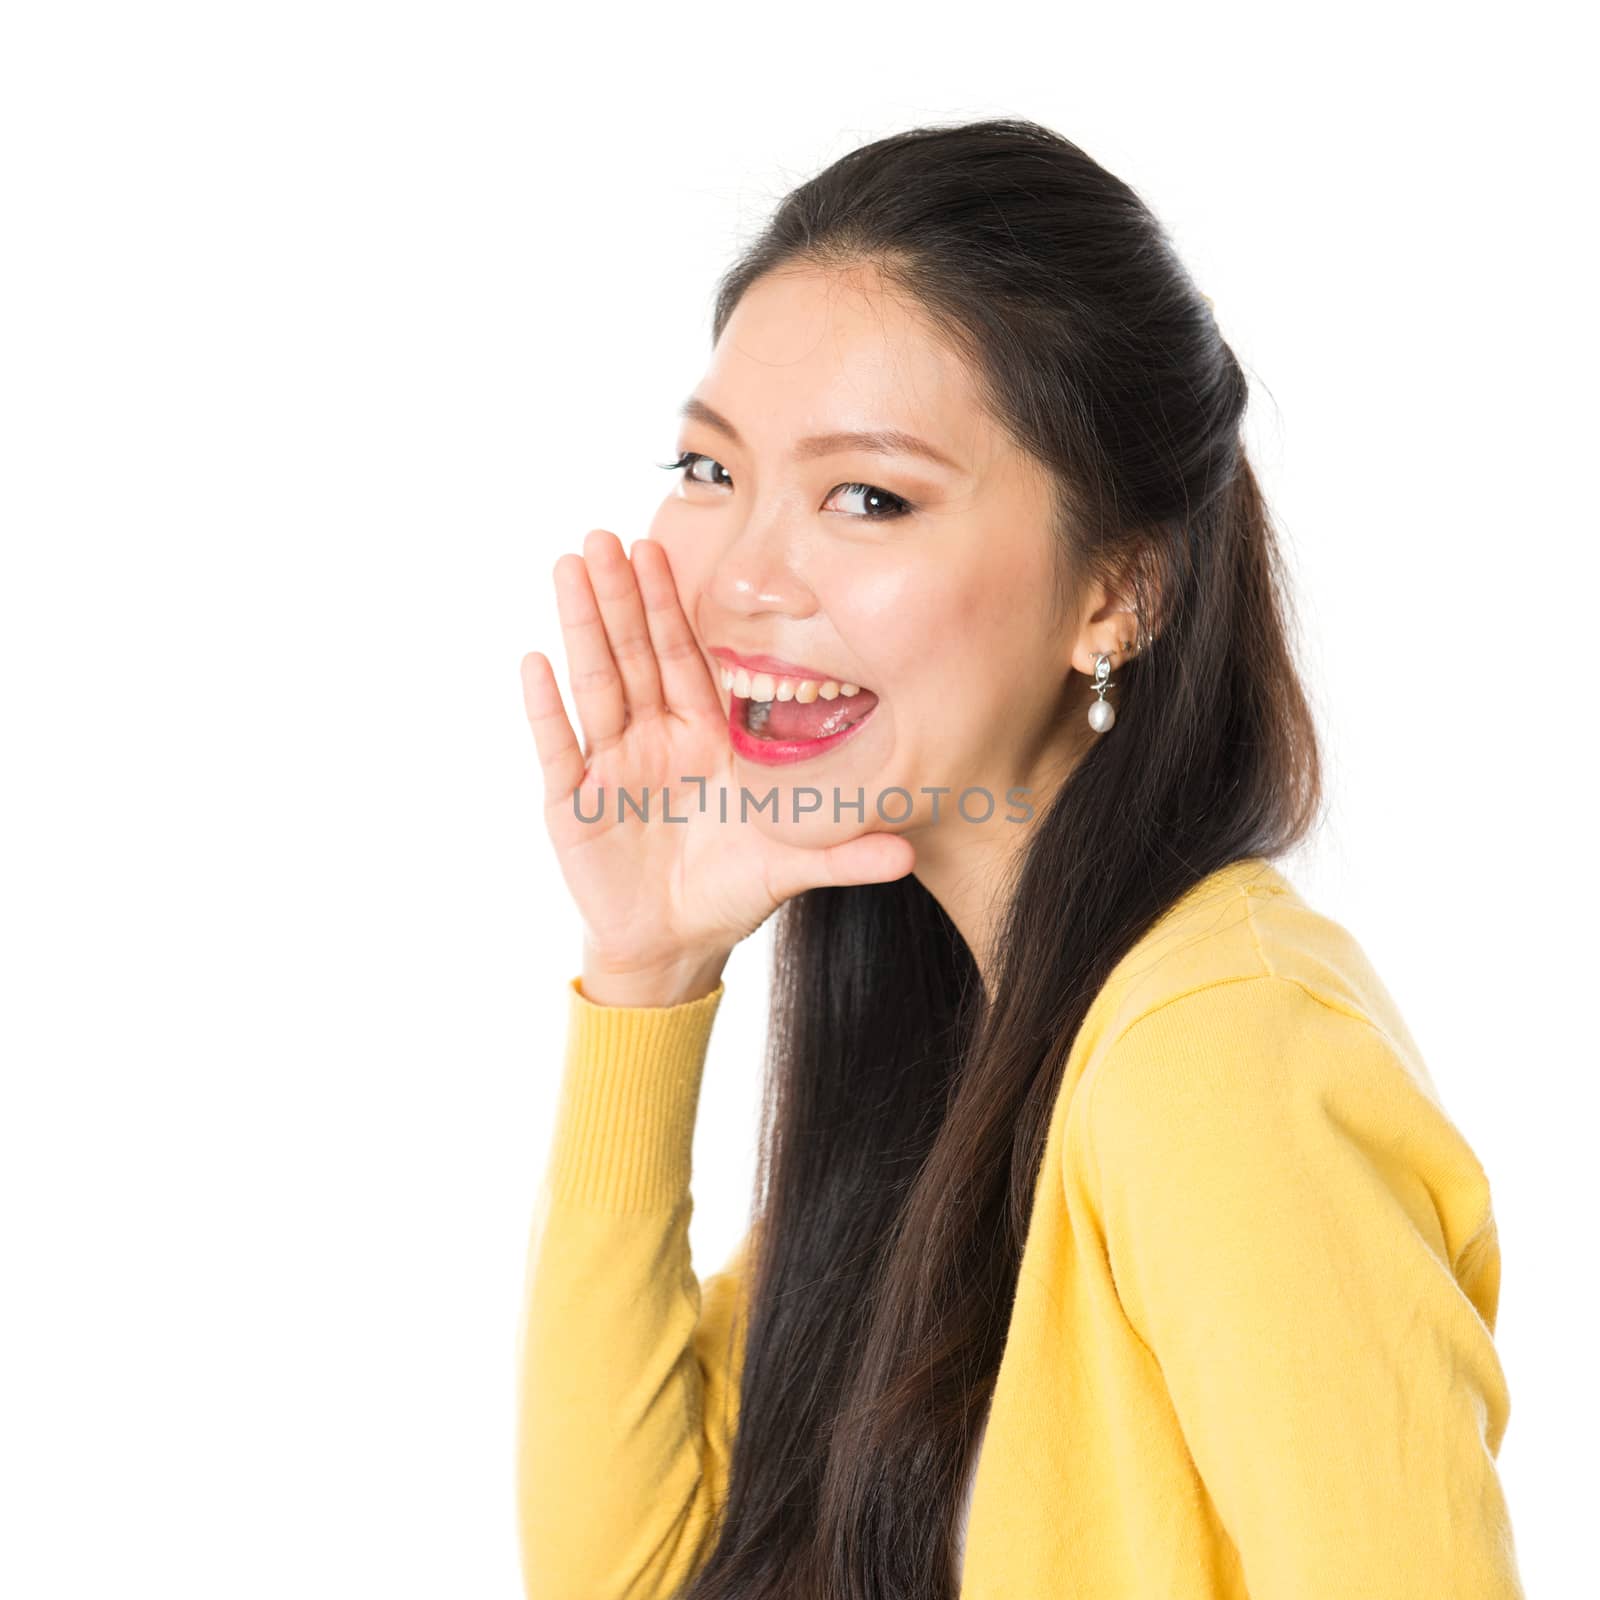 Asian girl shouting and looking at camera, standing isolated on white background.